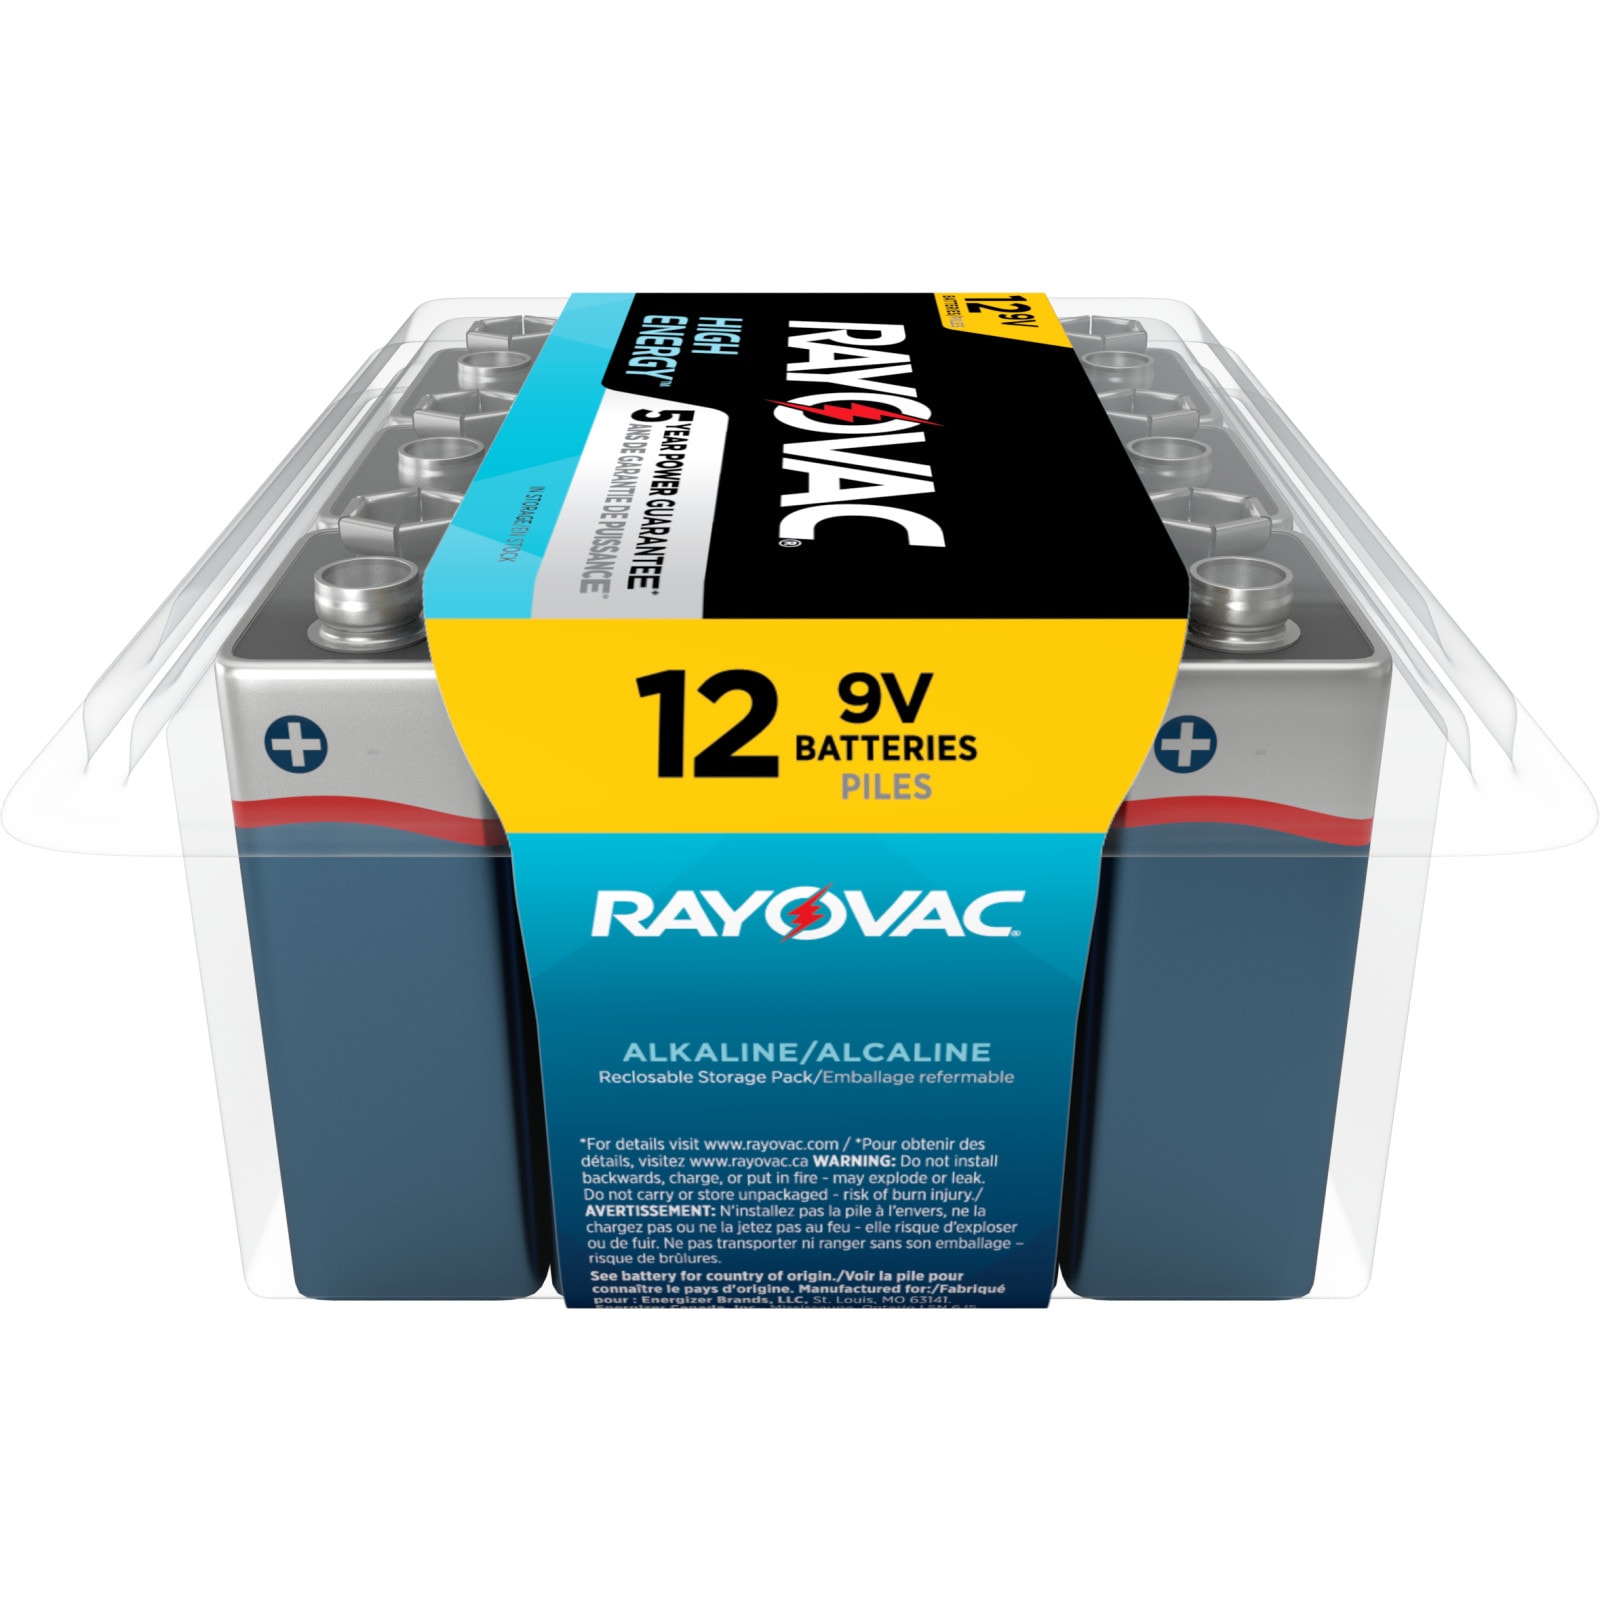 Rayovac High Energy Alkaline 9-Volt Batteries (12-Pack) in the 9